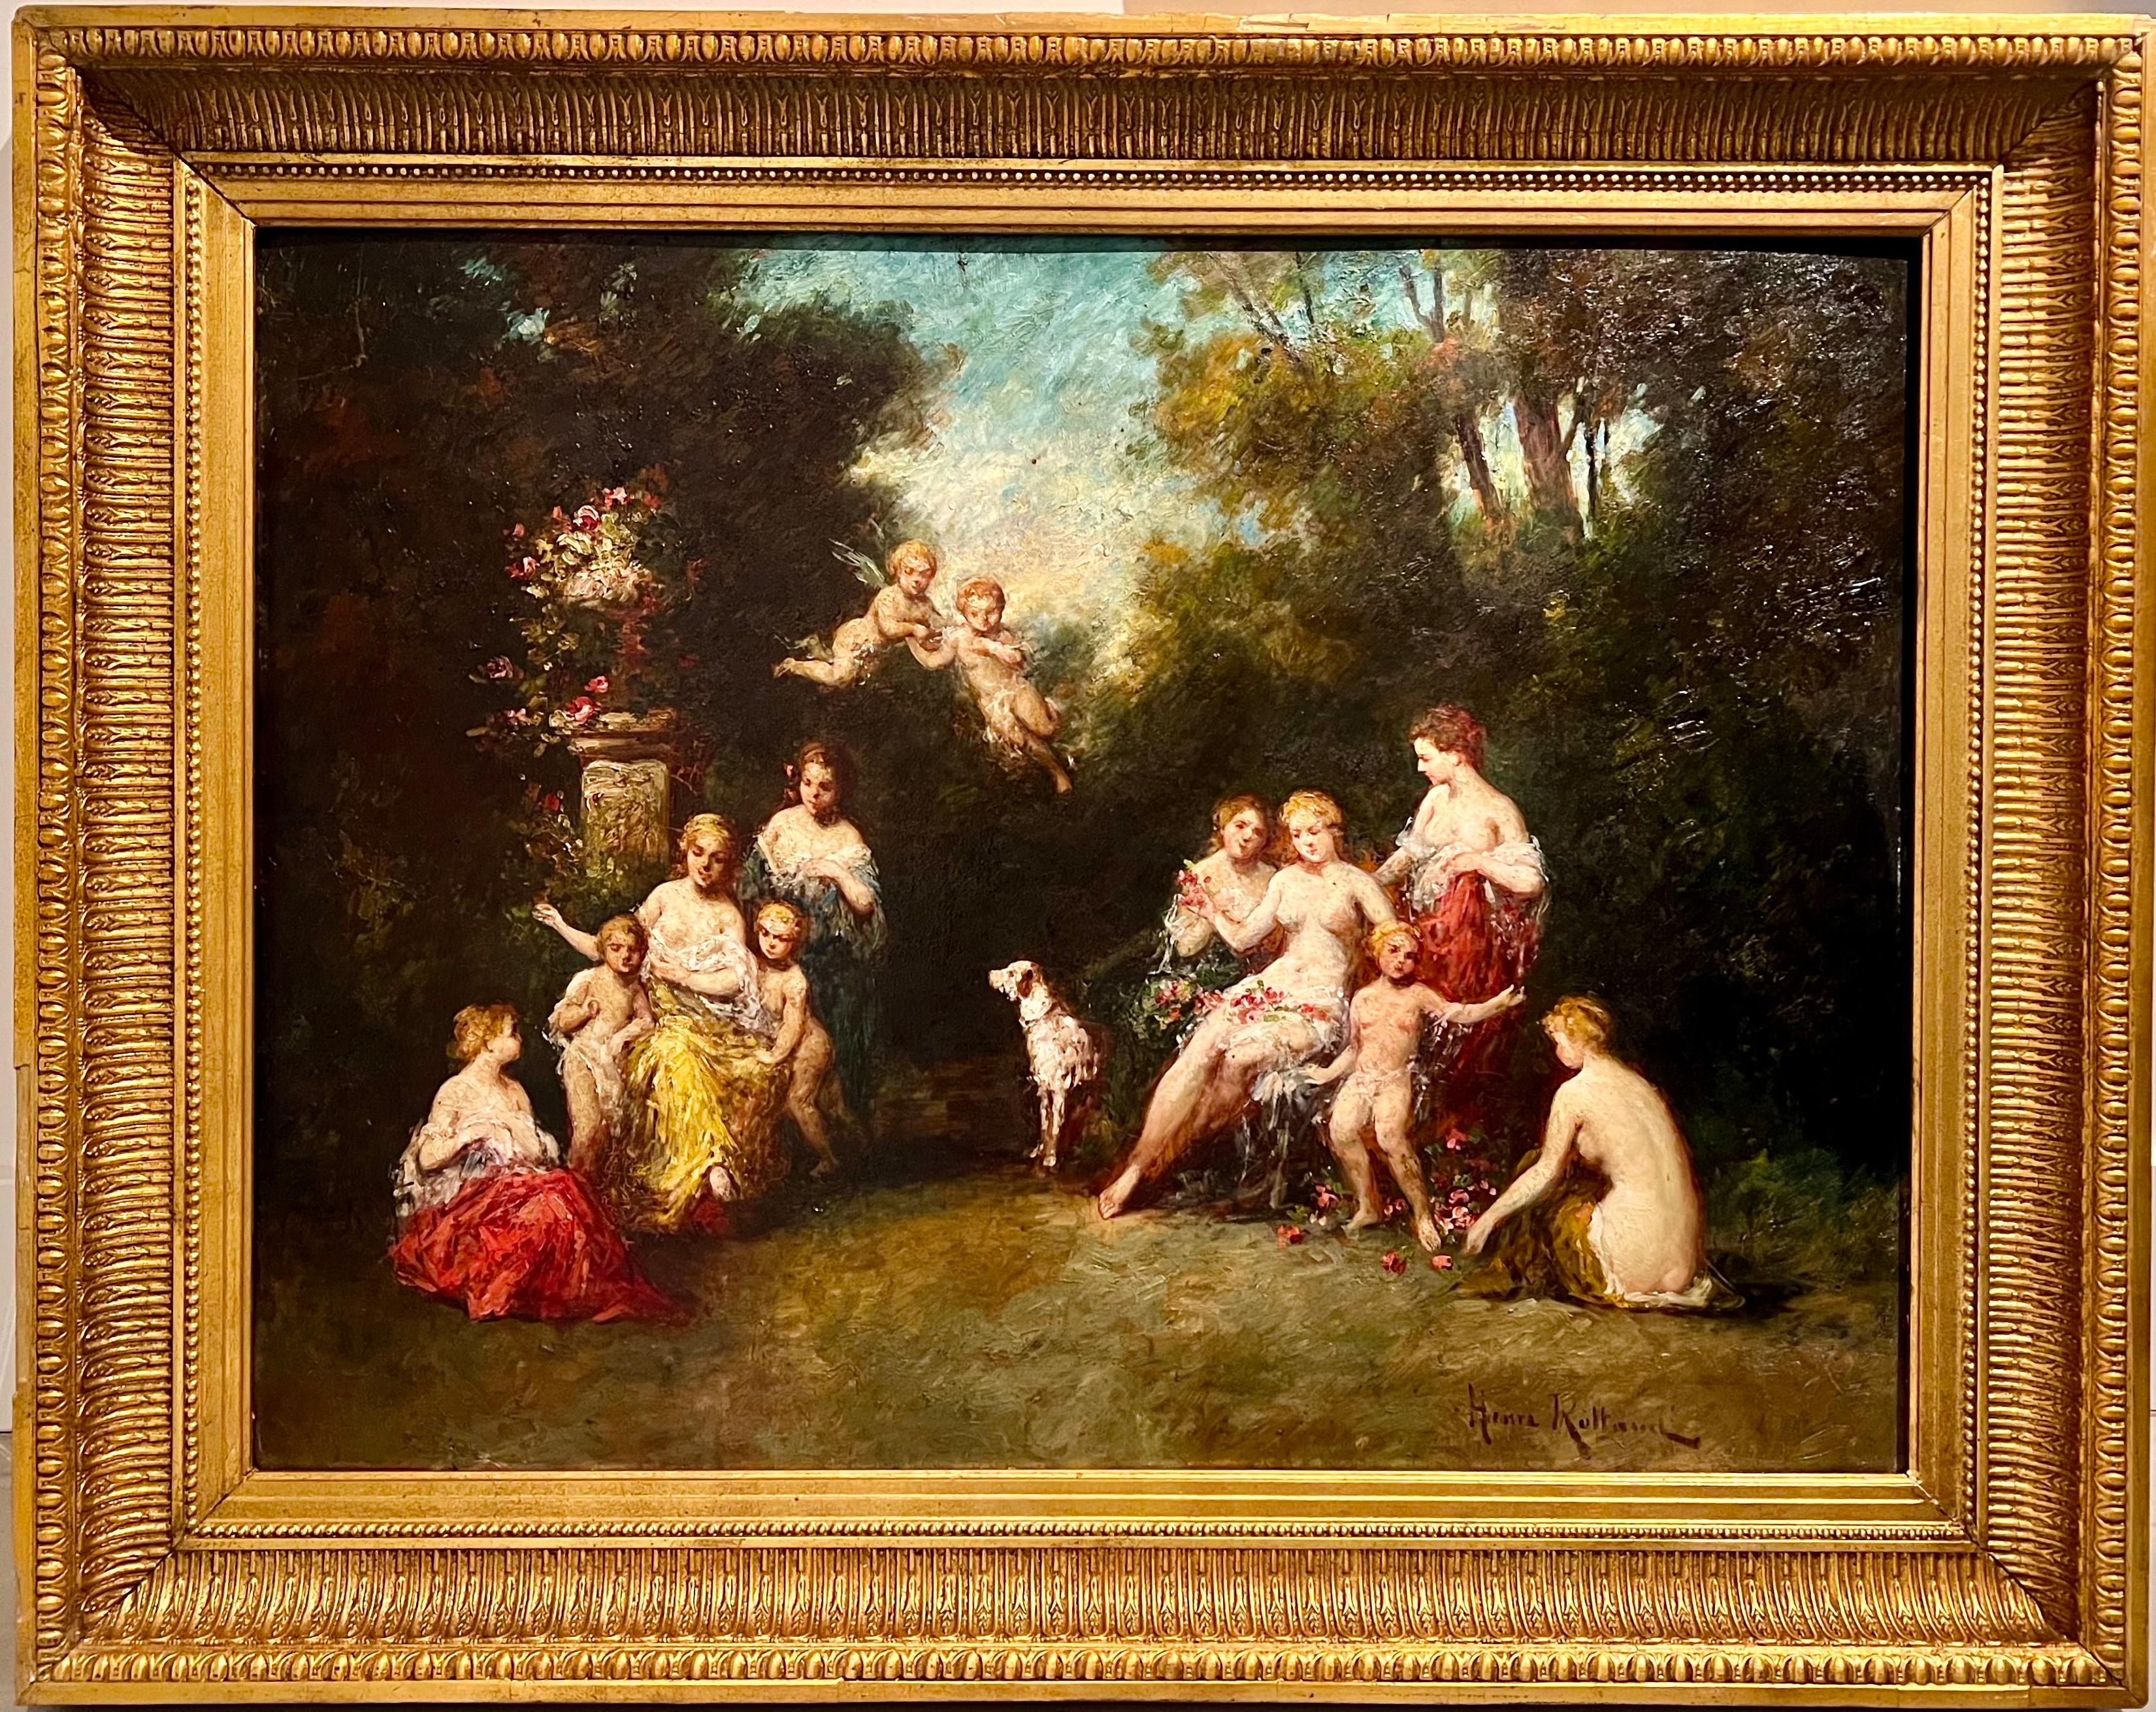 Henri Paul Rolland Figurative Painting - Large 19th century French Barbizon school oil - The outdoor concert - Monticelli